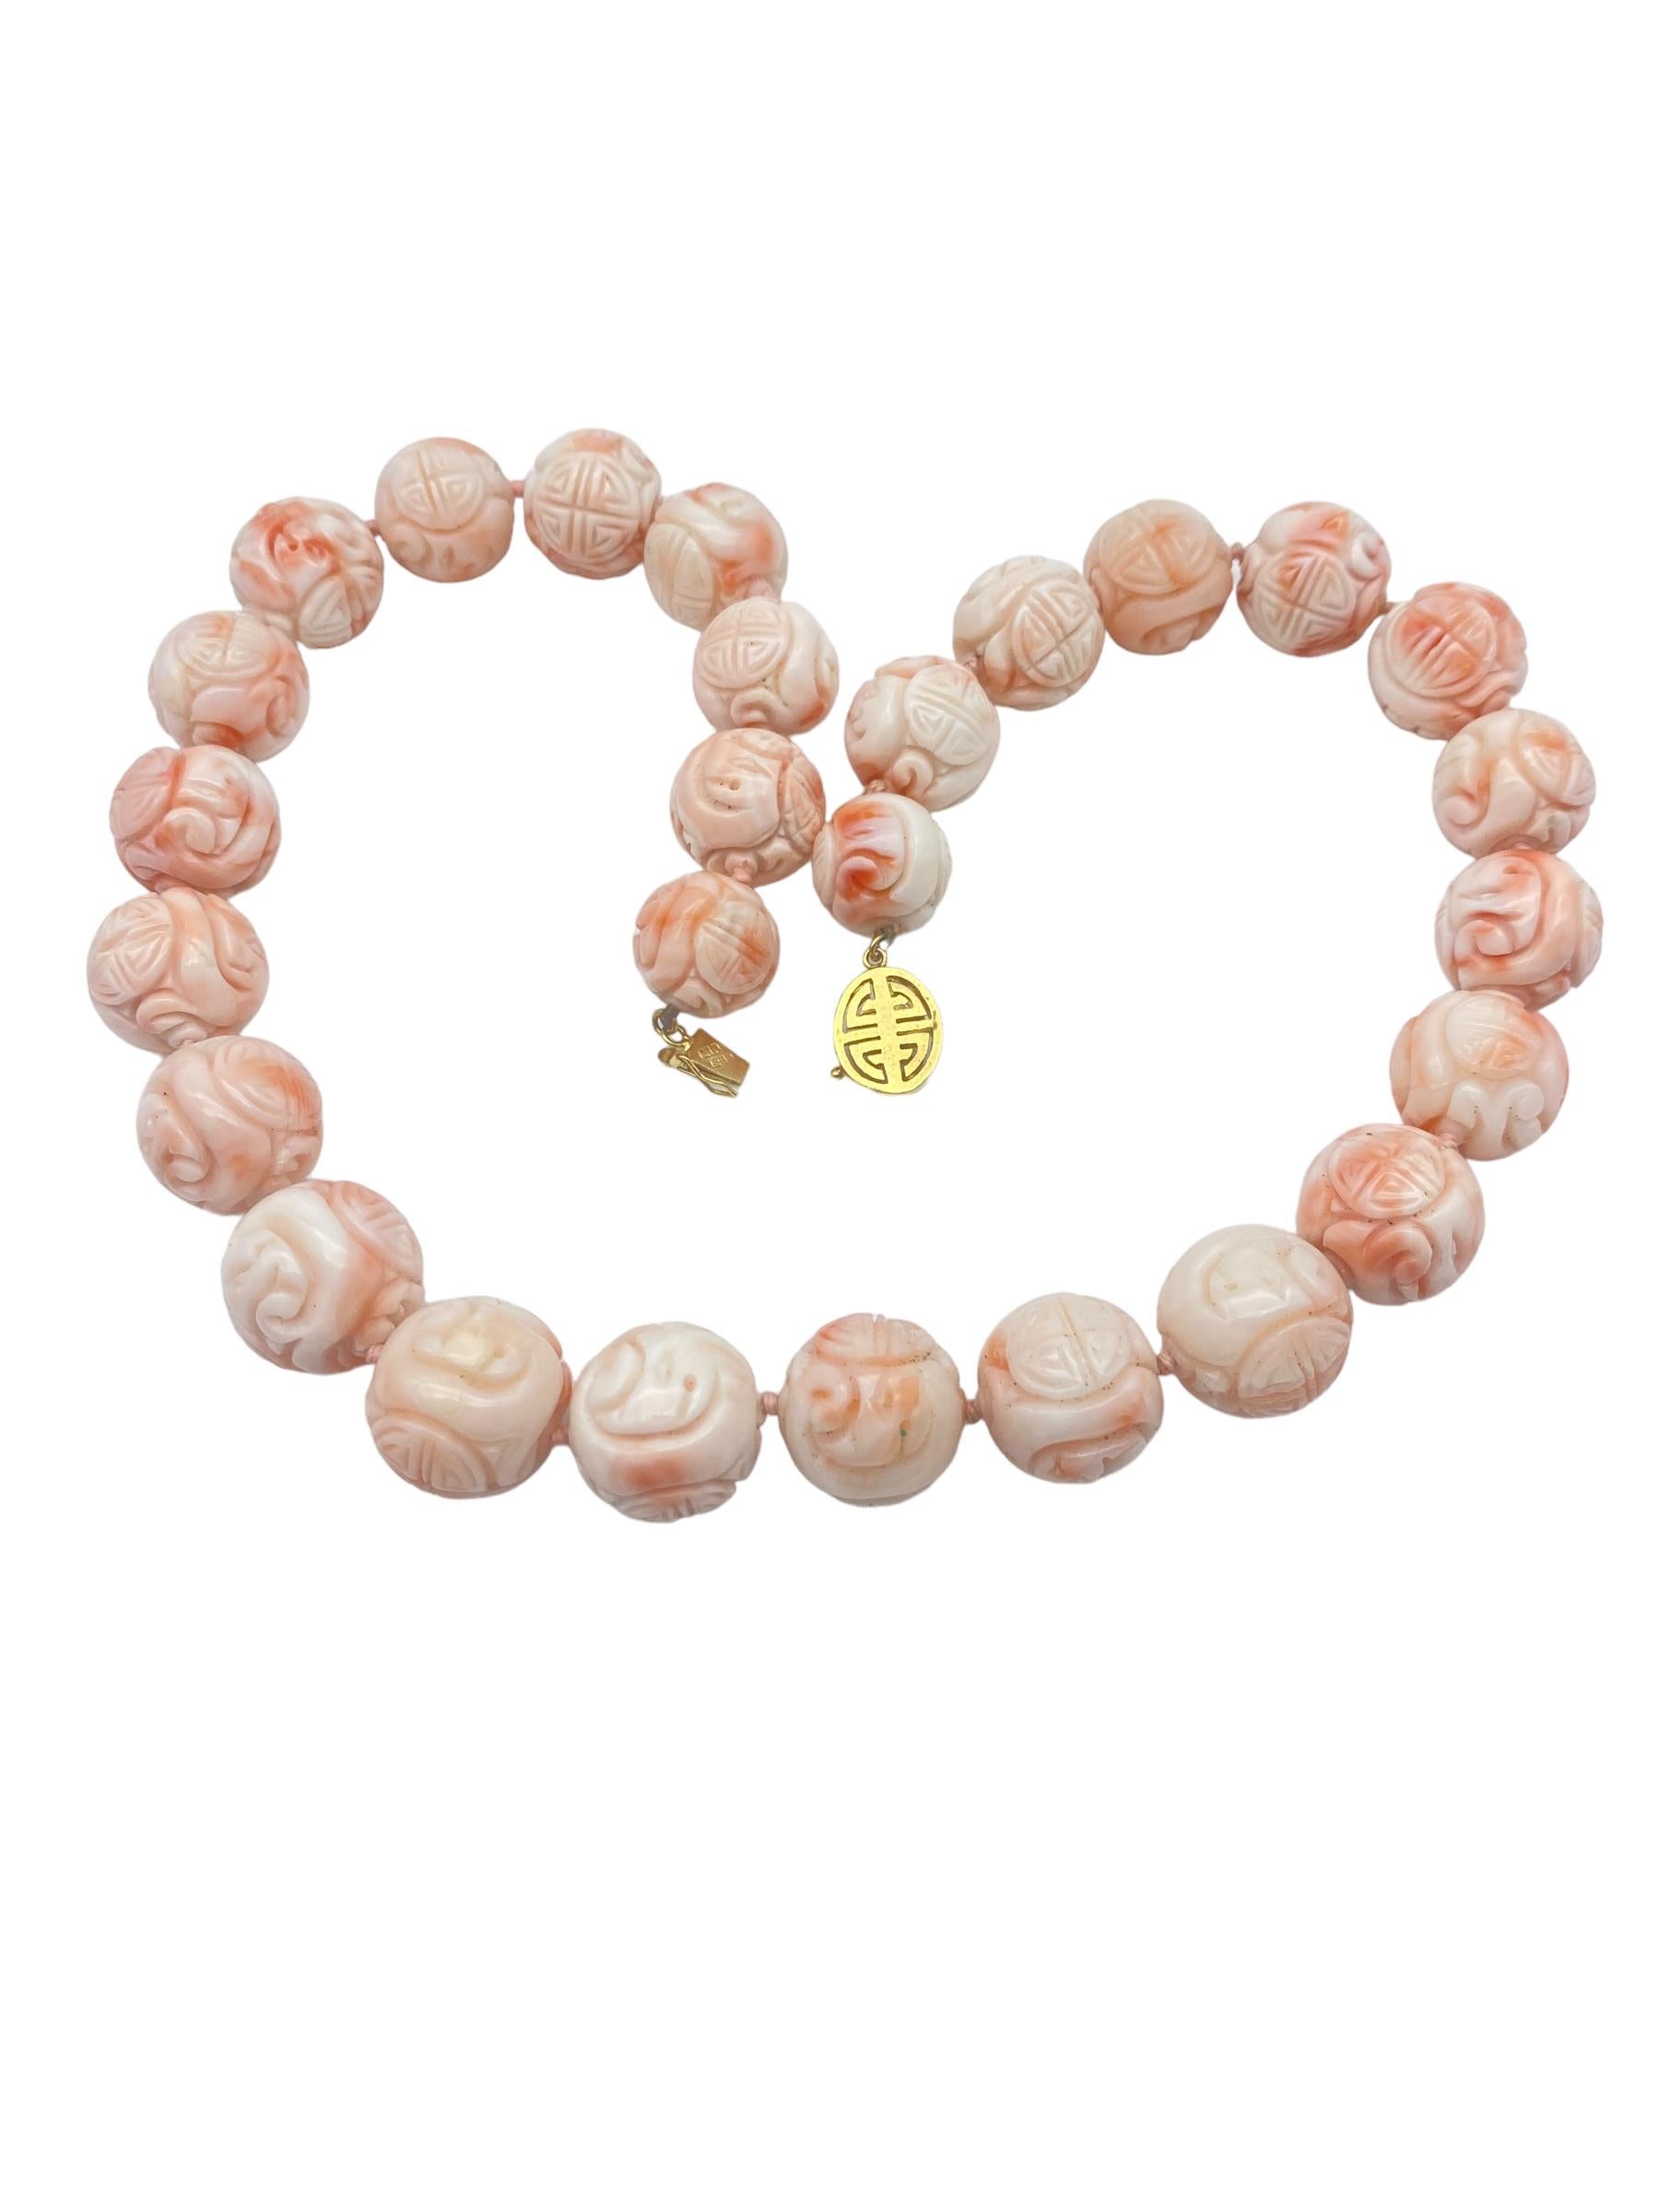 Exceptional carvings on every bead are individually carved with expressive artistry. The deep colors of desirable coral are interestingly expressed in the carvings. The strand is 18 inches long and has a gold 14-karat clasp measuring 14 mm. 
The